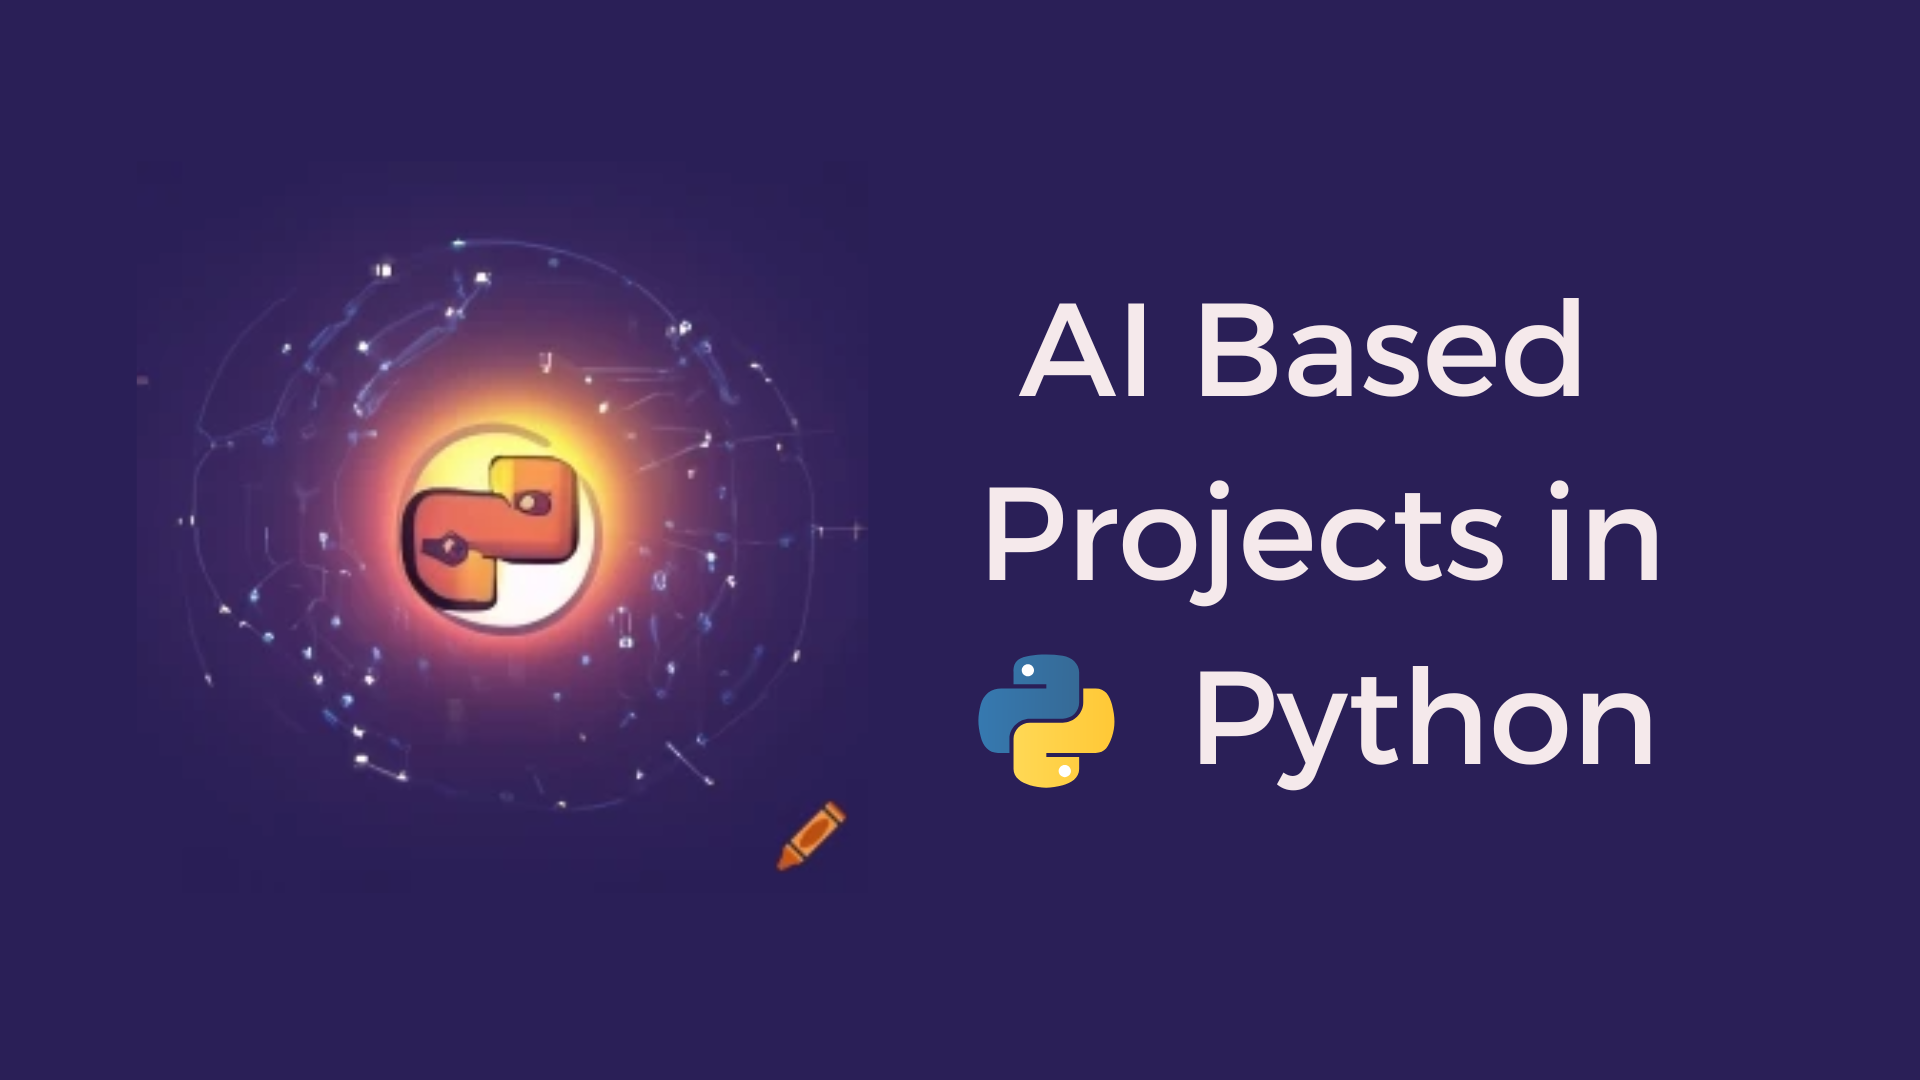 AI Based Projects using Python